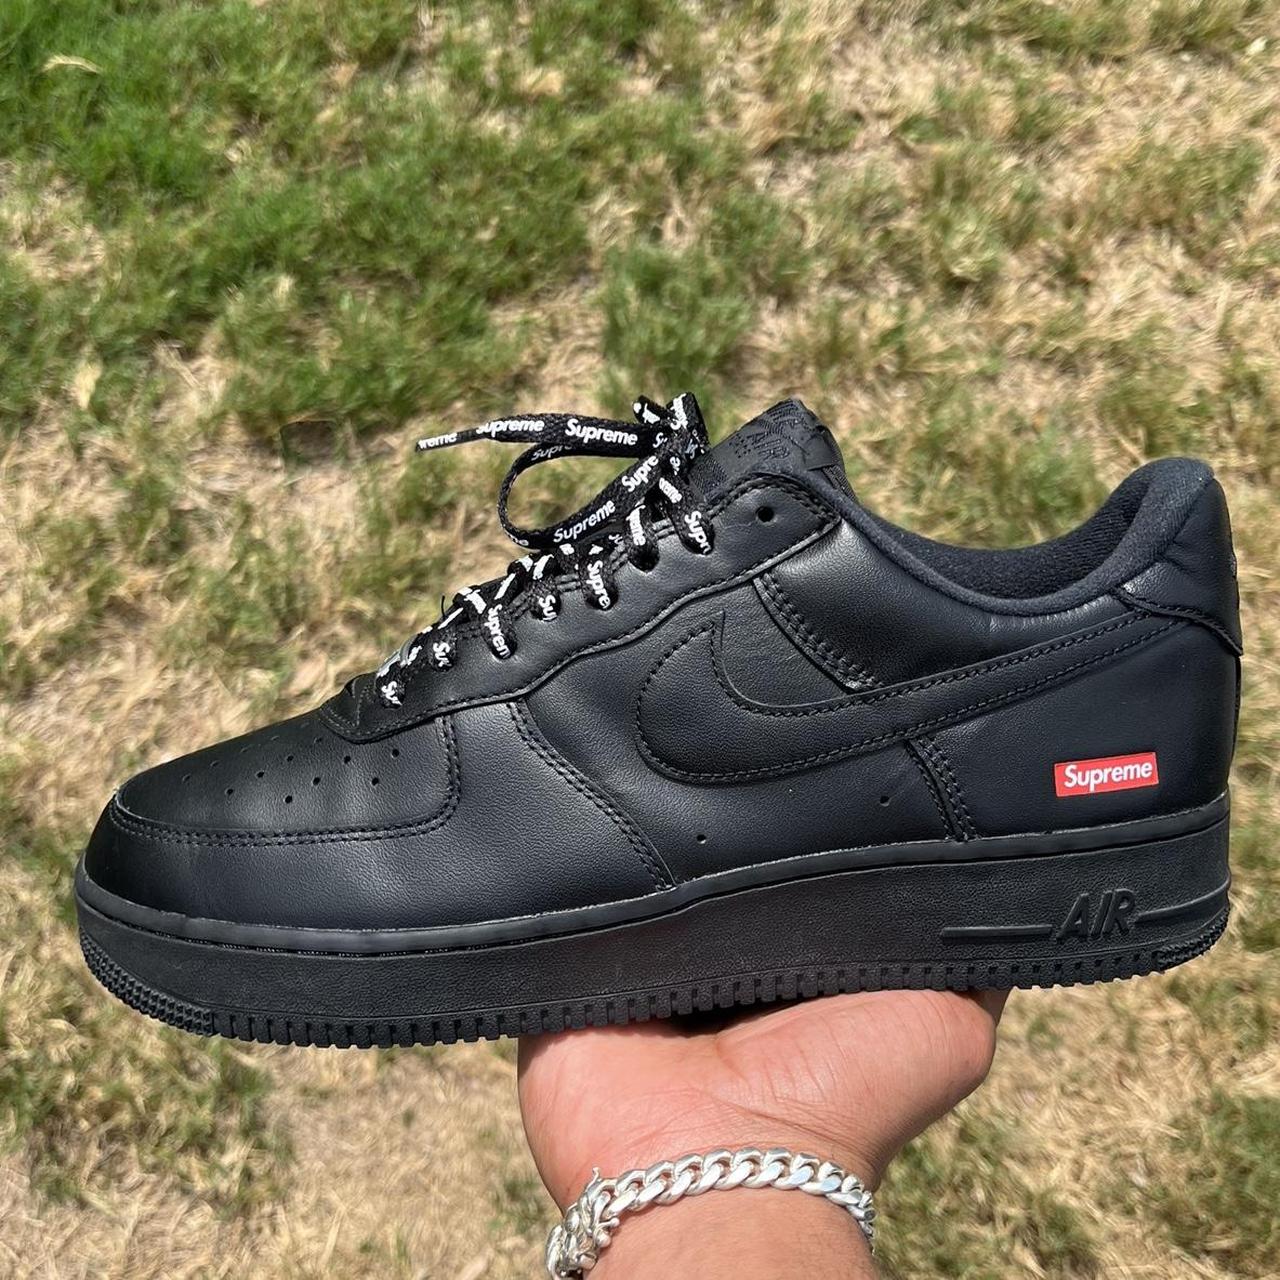 Leather Nike Air Force 1 Supreme Black Men's Sneakers